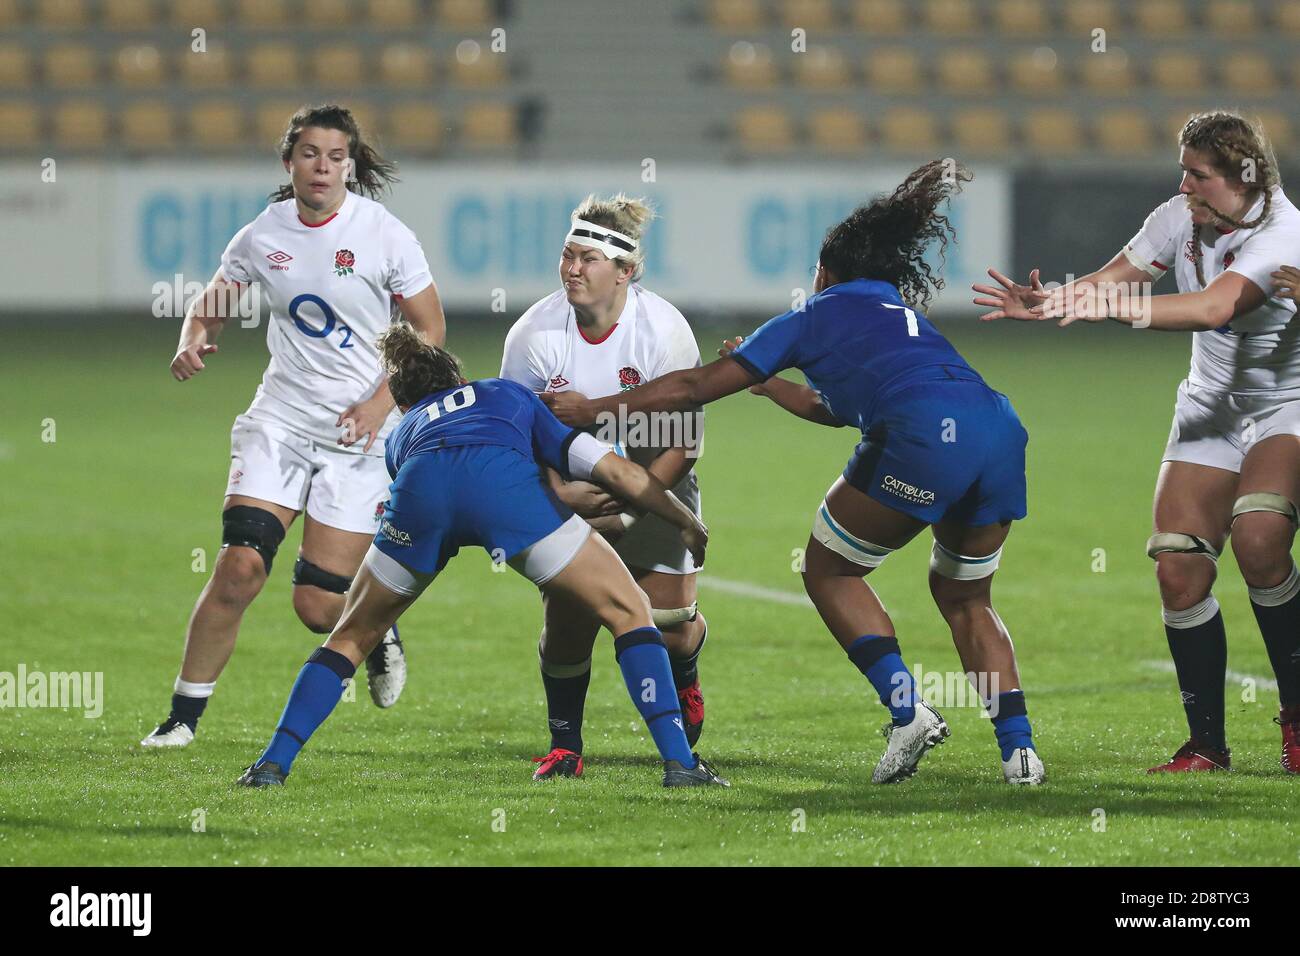 Parma, Italy. 1st Nov, 2020. parma, Italy, Sergio Lanfranchi stadium, 01 Nov 2020, Marlie Packer (England) with a carries during Women 2020 - Italy vs England - Rugby Six Nations match - Credit: LM/Massimiliano Carnabuci Credit: Massimiliano Carnabuci/LPS/ZUMA Wire/Alamy Live News Stock Photo